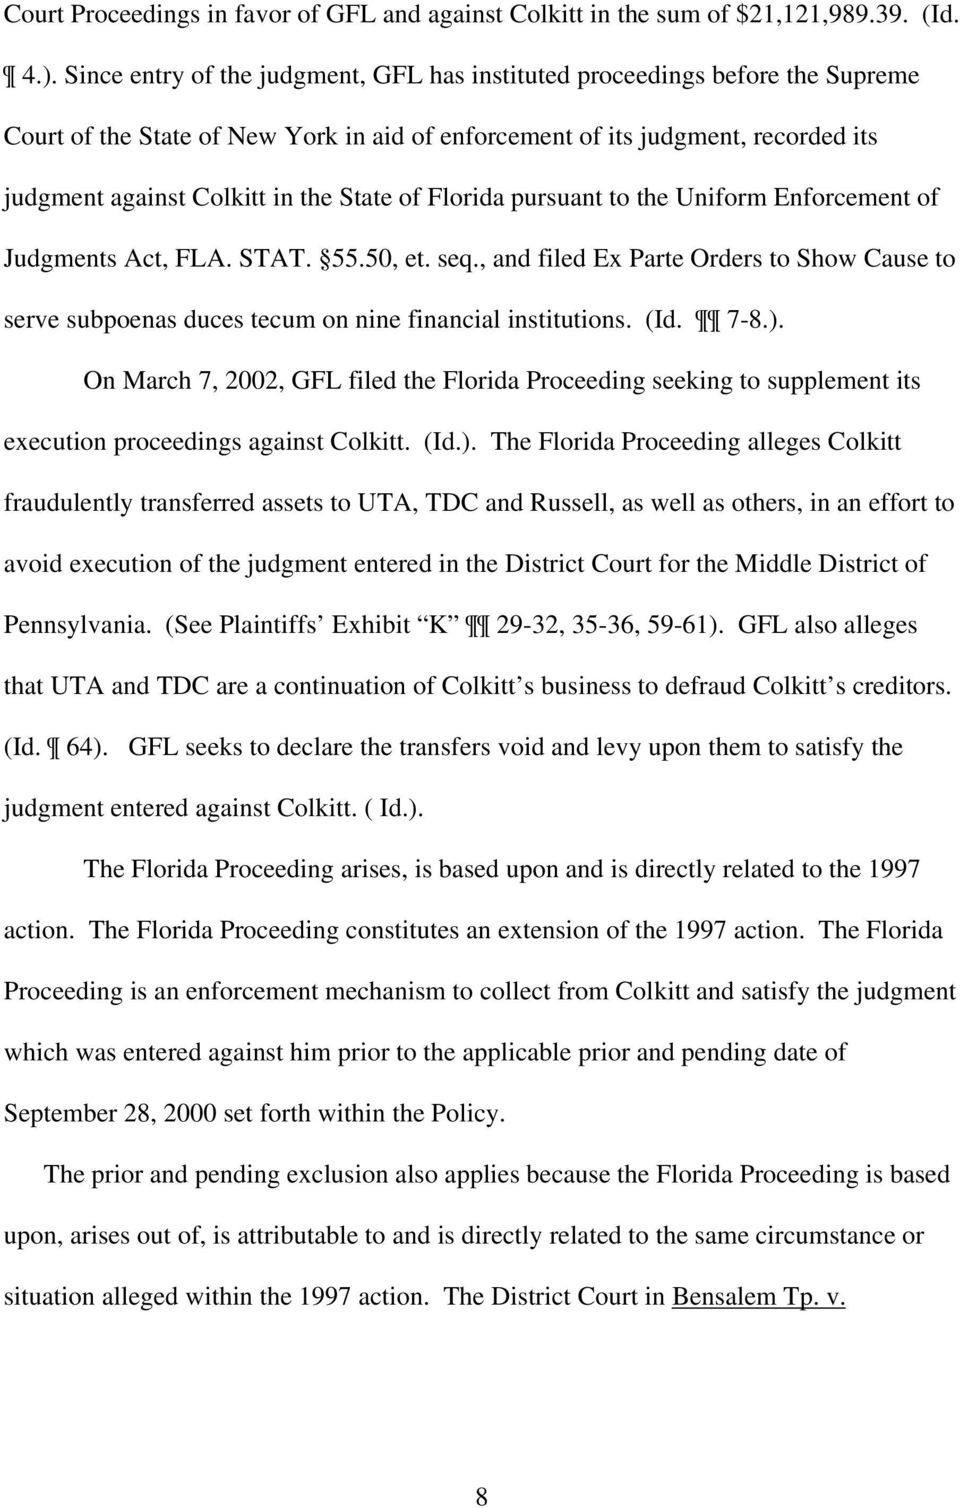 of Florida pursuant to the Uniform Enforcement of Judgments Act, FLA. STAT. 55.50, et. seq., and filed Ex Parte Orders to Show Cause to serve subpoenas duces tecum on nine financial institutions. (Id.